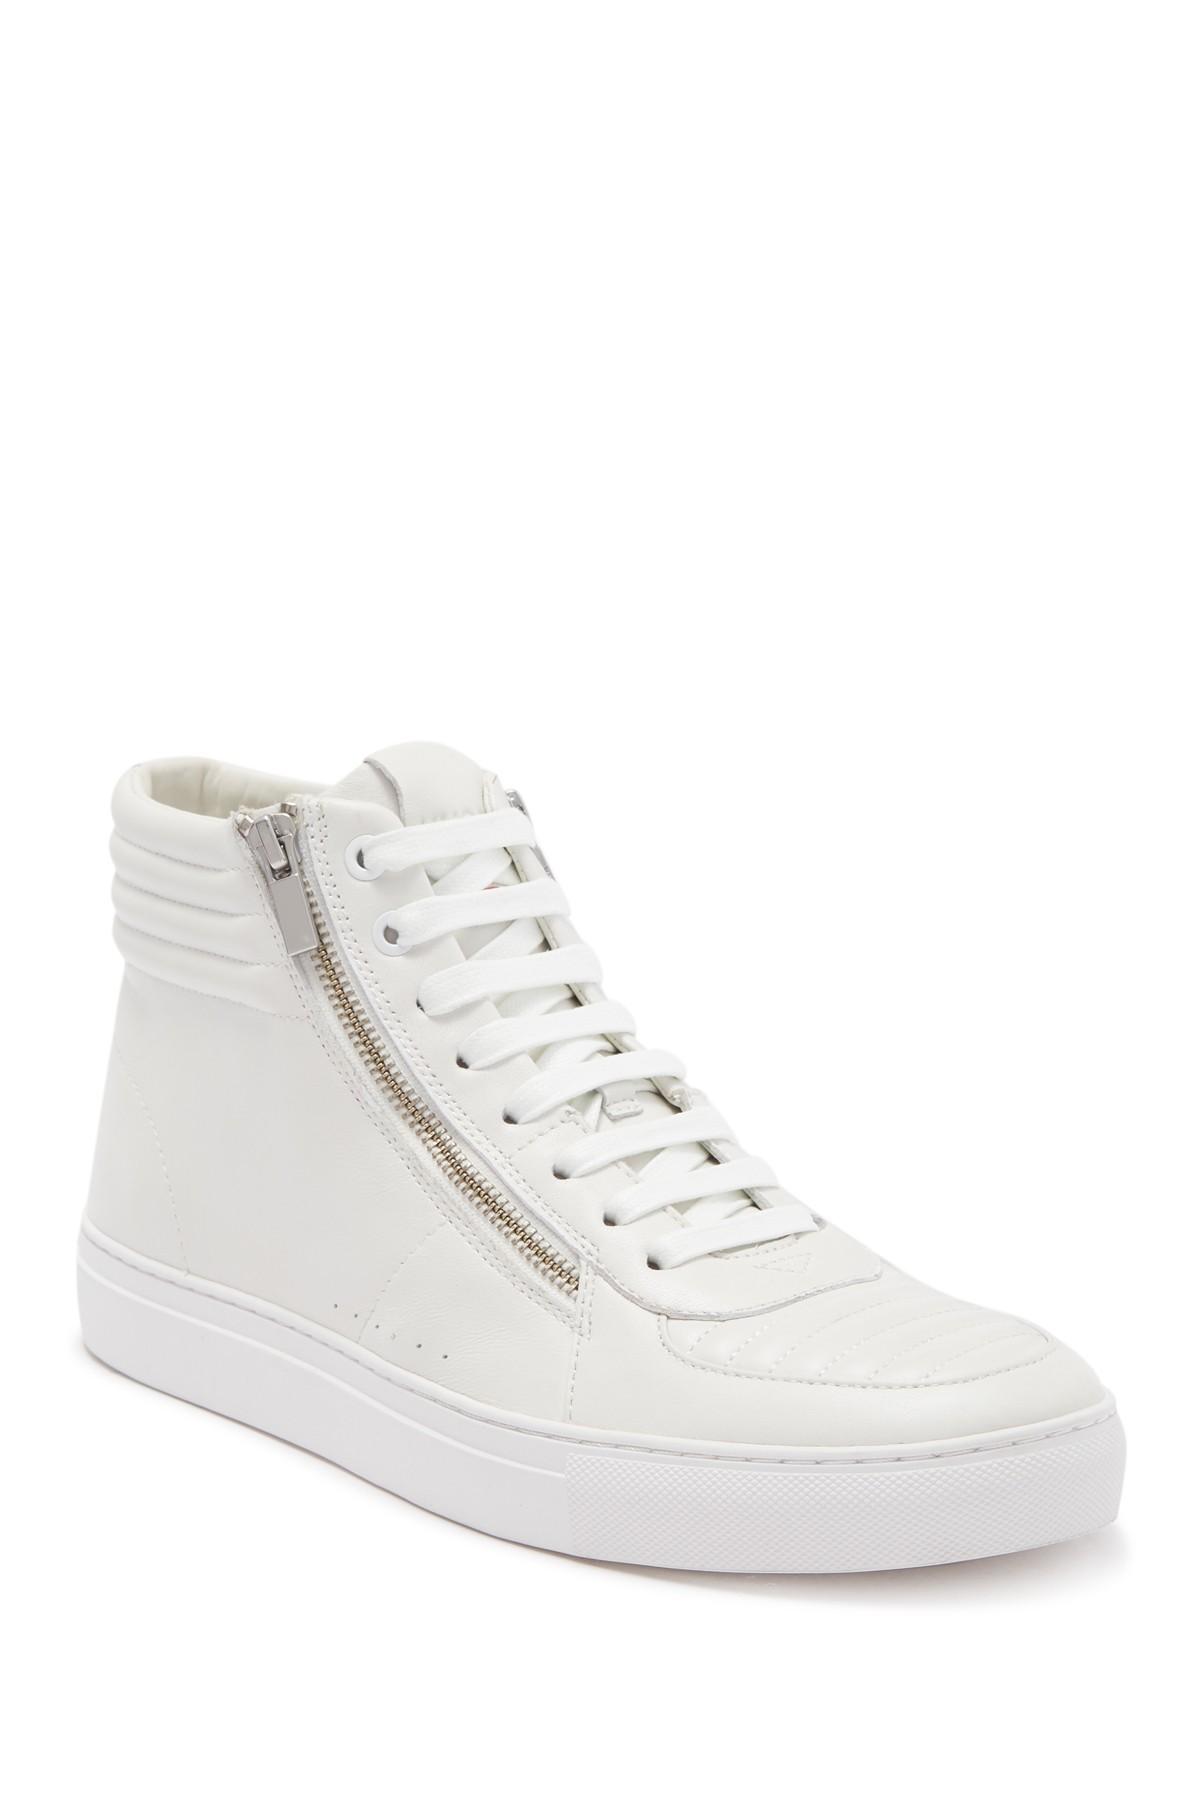 BOSS by Hugo Boss Leather Futurism Hito Quilted Zip High Top Sneaker in  White for Men - Lyst